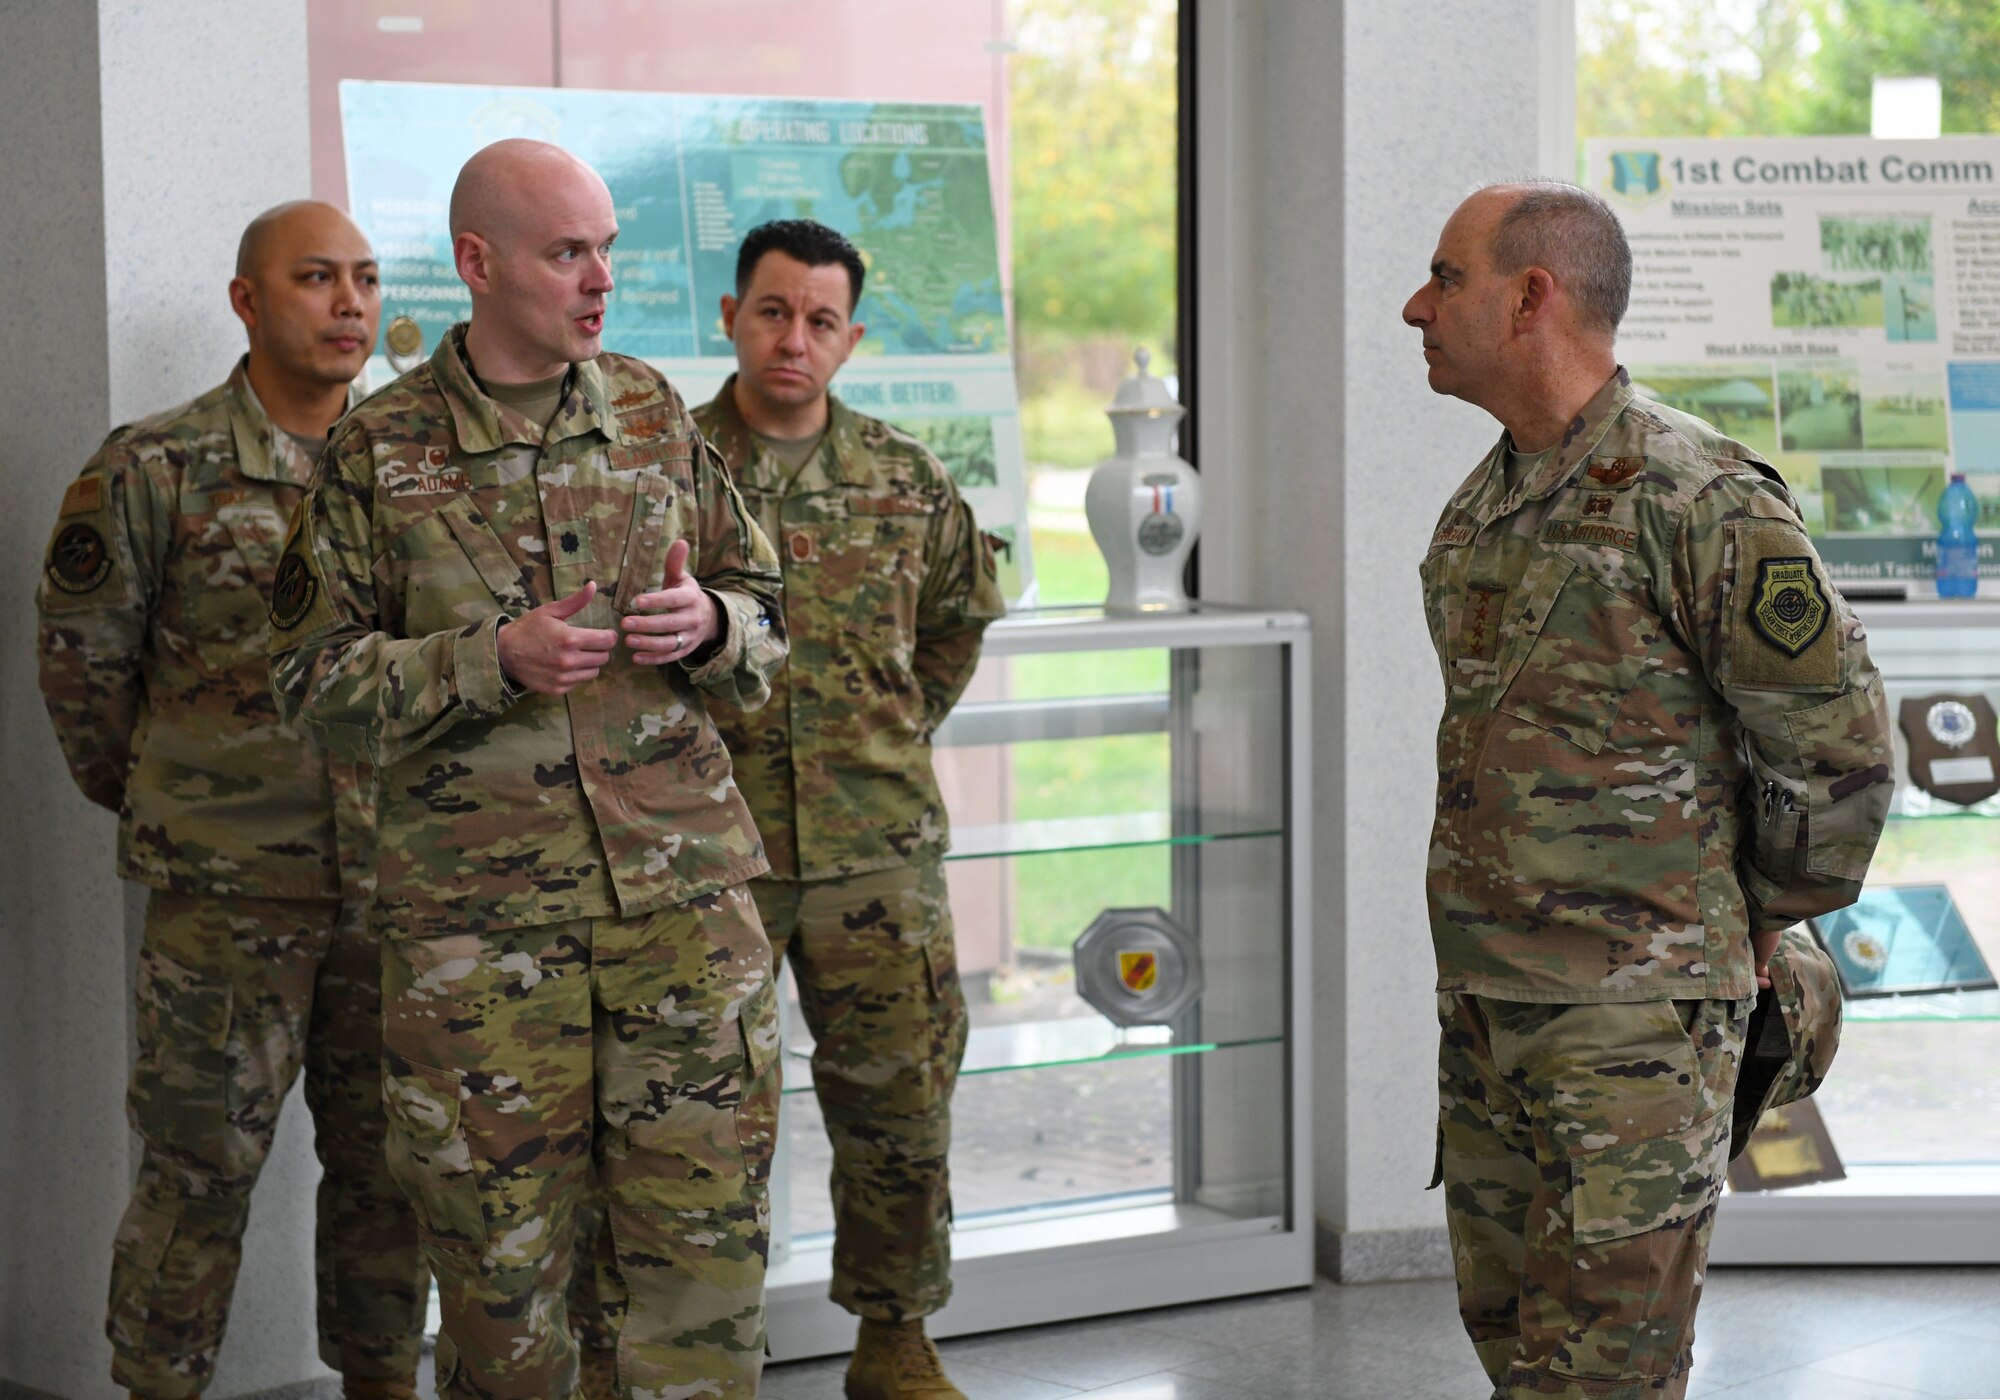 U.S. Air Force Lt. Col. Andrew Adams, 1st Air and Space Communications Squadron commander, briefs Gen. Jeff Harrigian, U.S. Air Forces in Europe and Air Forces Africa commander, during an immersion tour at Ramstein Air Base, Germany, Oct. 23, 2019. During the tour, Harrigian learned about Airmen’s innovations and challenges as well as current operations from experts across the 435th Air Ground Operations Wing and the 435th Air Expeditionary Wing. (U.S. Air Force photo by Staff Sgt. Alex Fox Echols III)